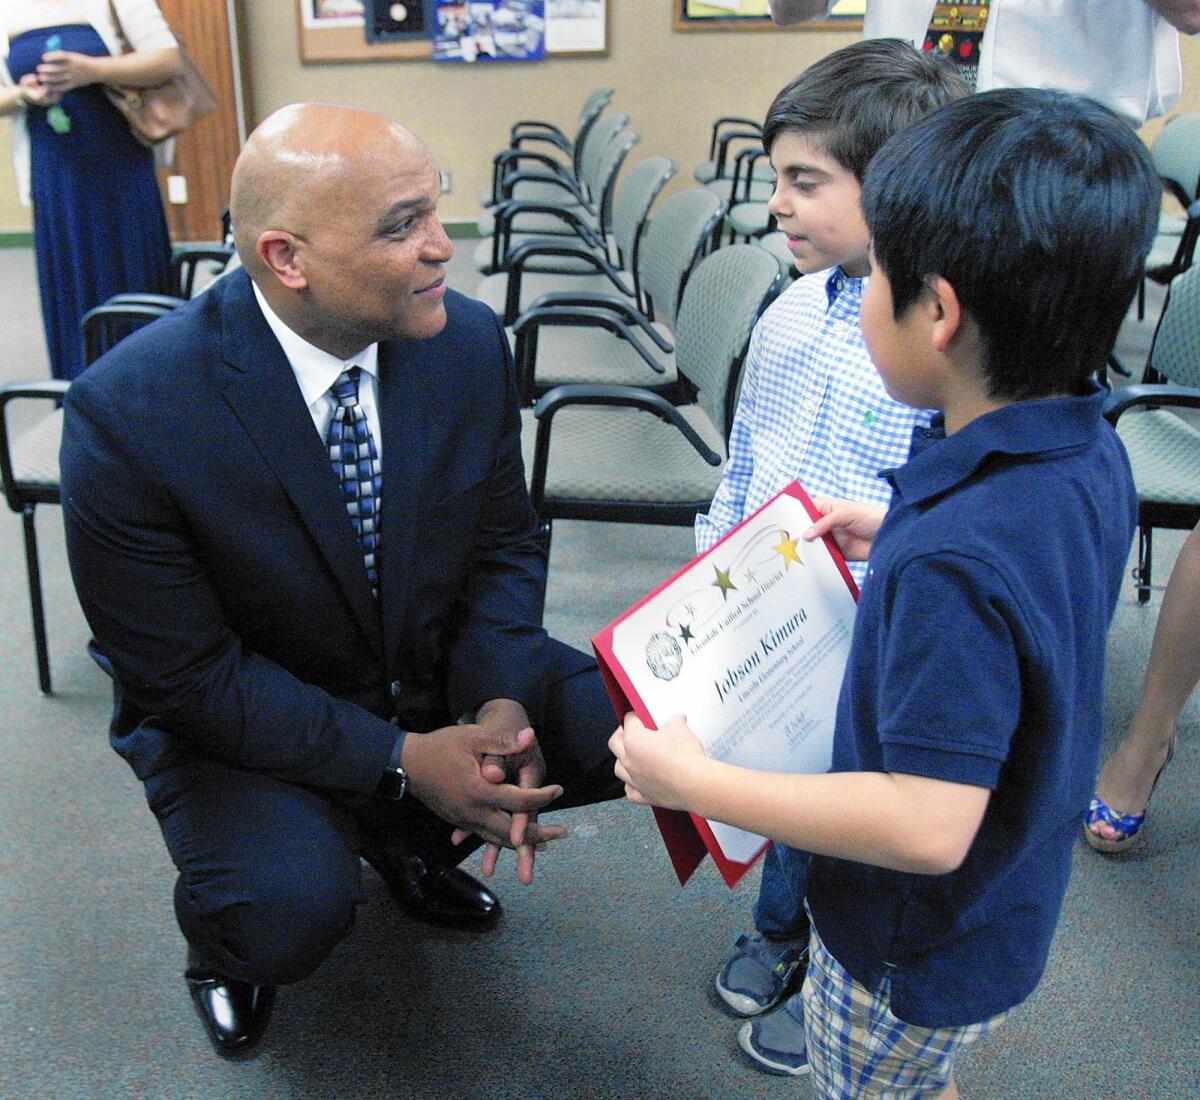 Winfred Roberson Jr. speaks with Lincoln Elementary students Peter James, 6, and Jobson Kimura, 7. Roberson was hired by the Glendale Unified School District as its new superintendent Tuesday, Feb. 16, 2016.